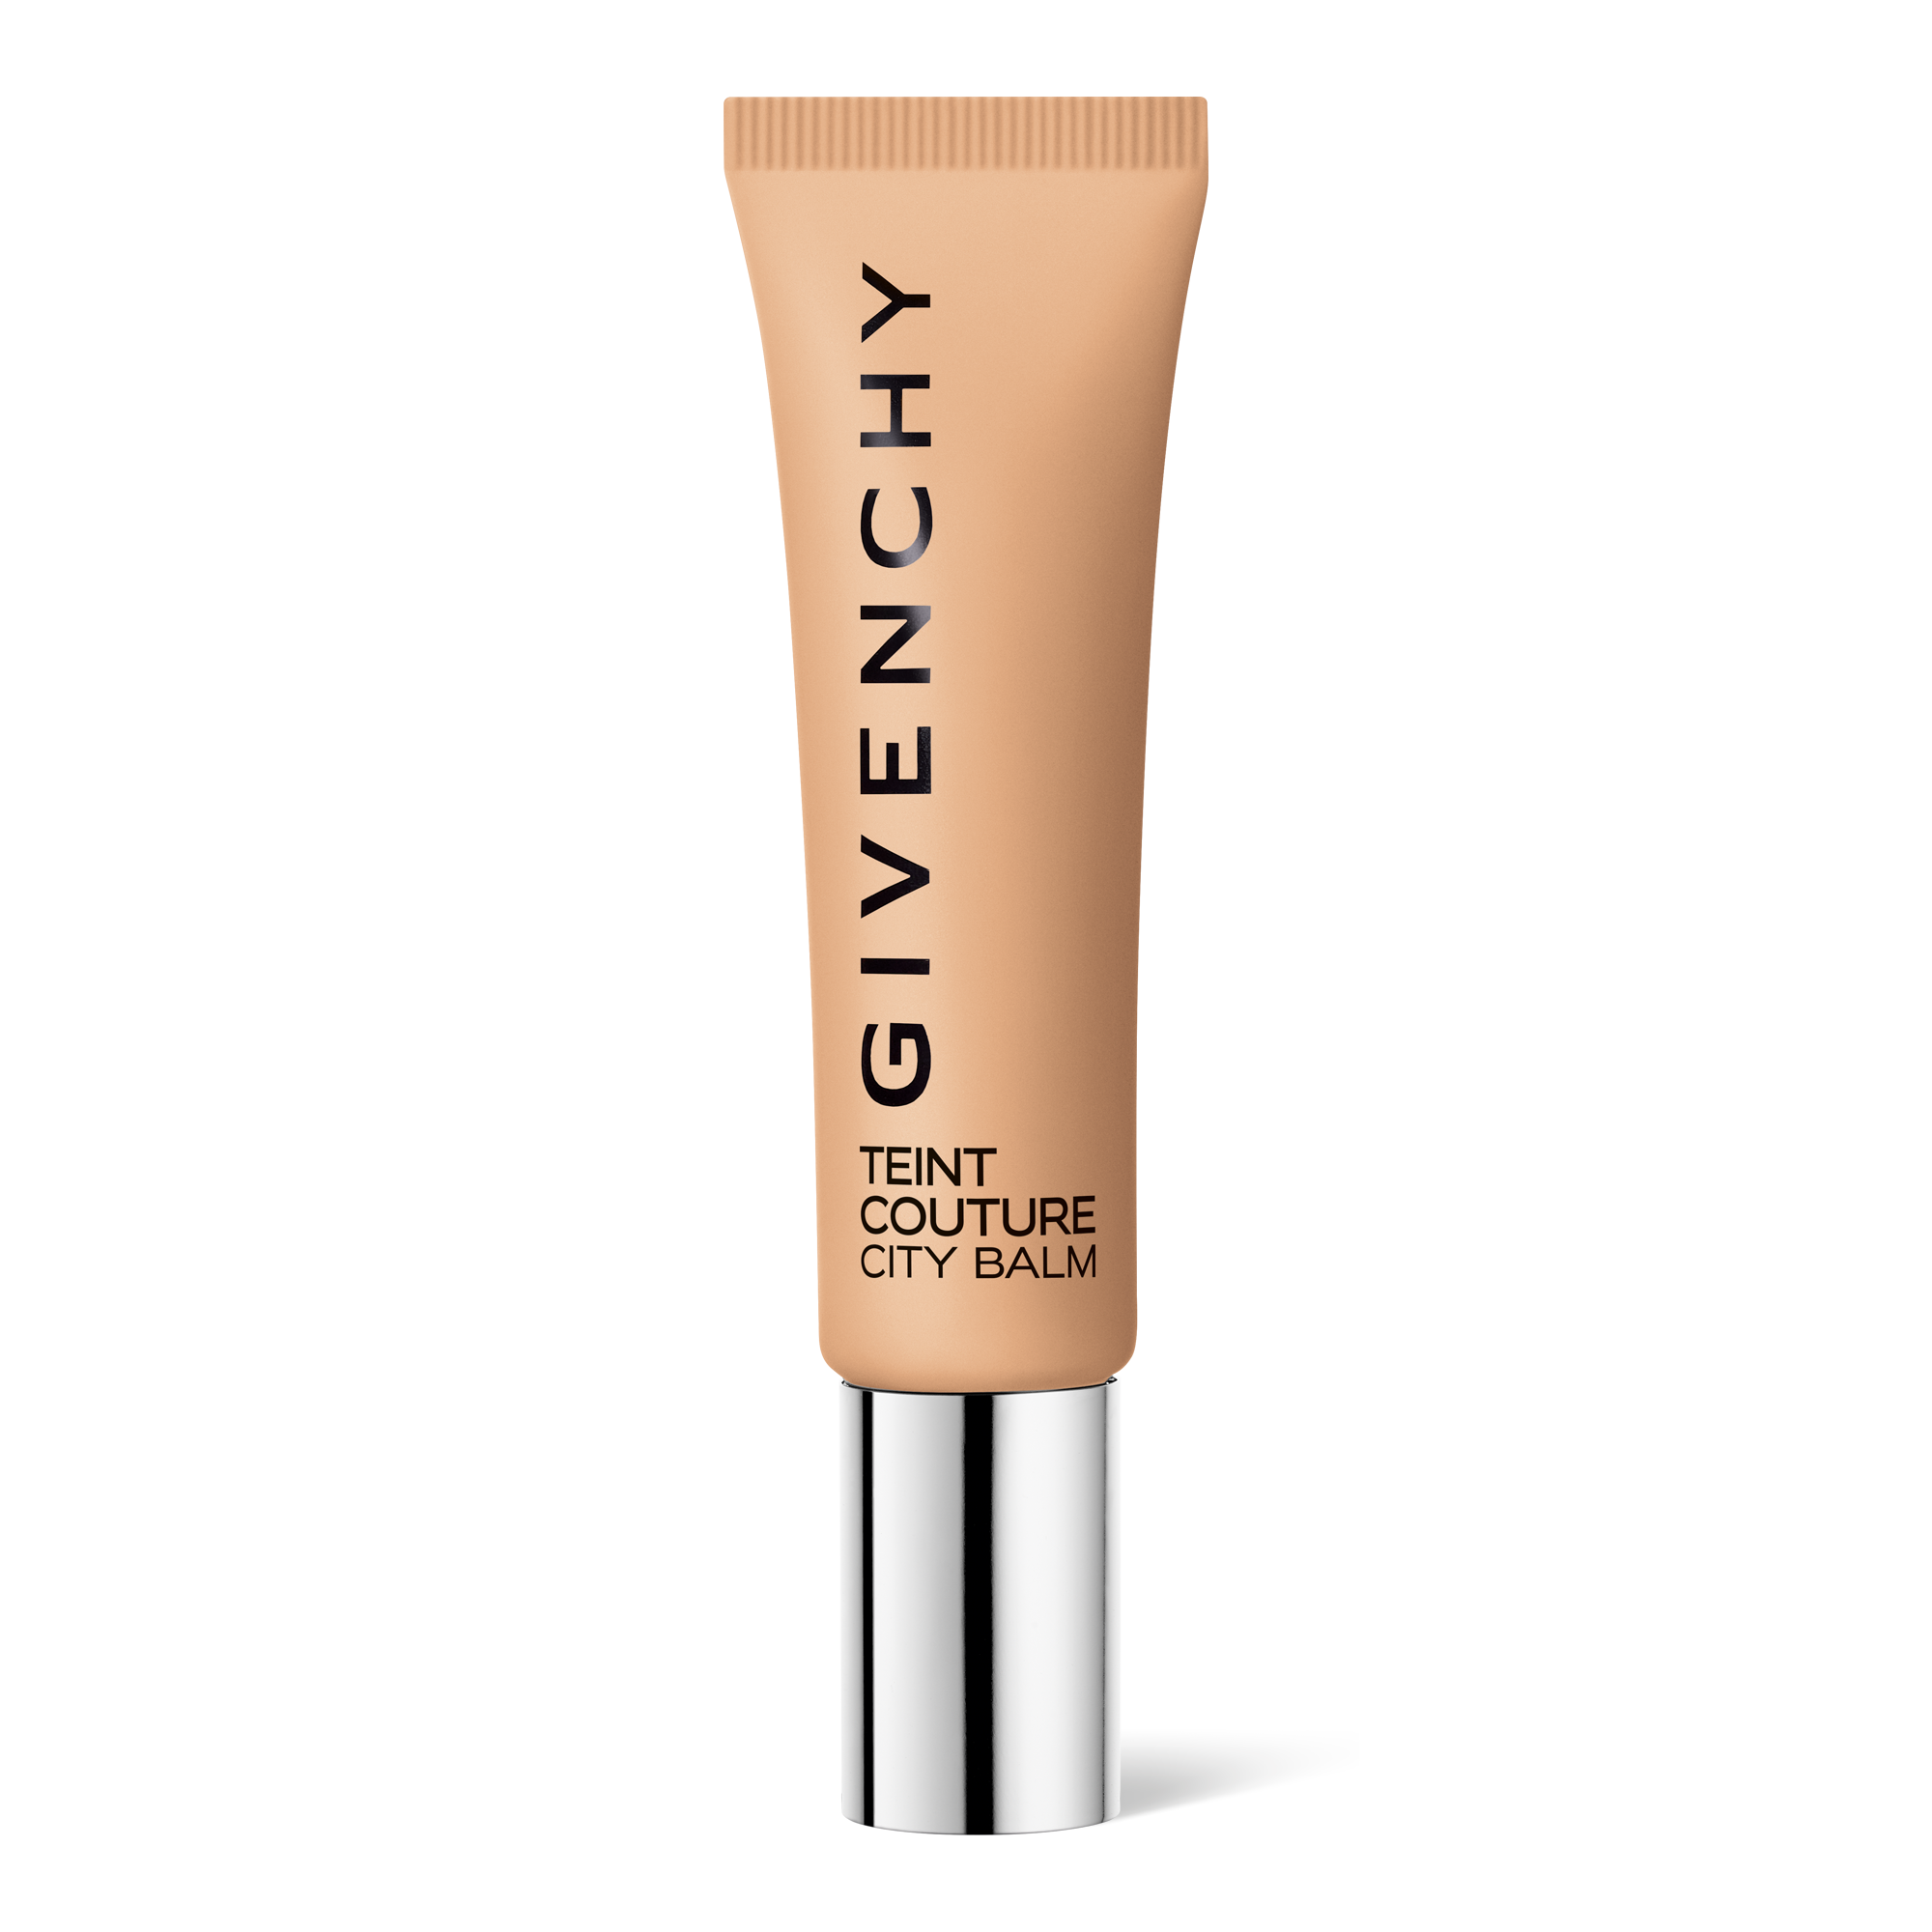 givenchy full coverage foundation